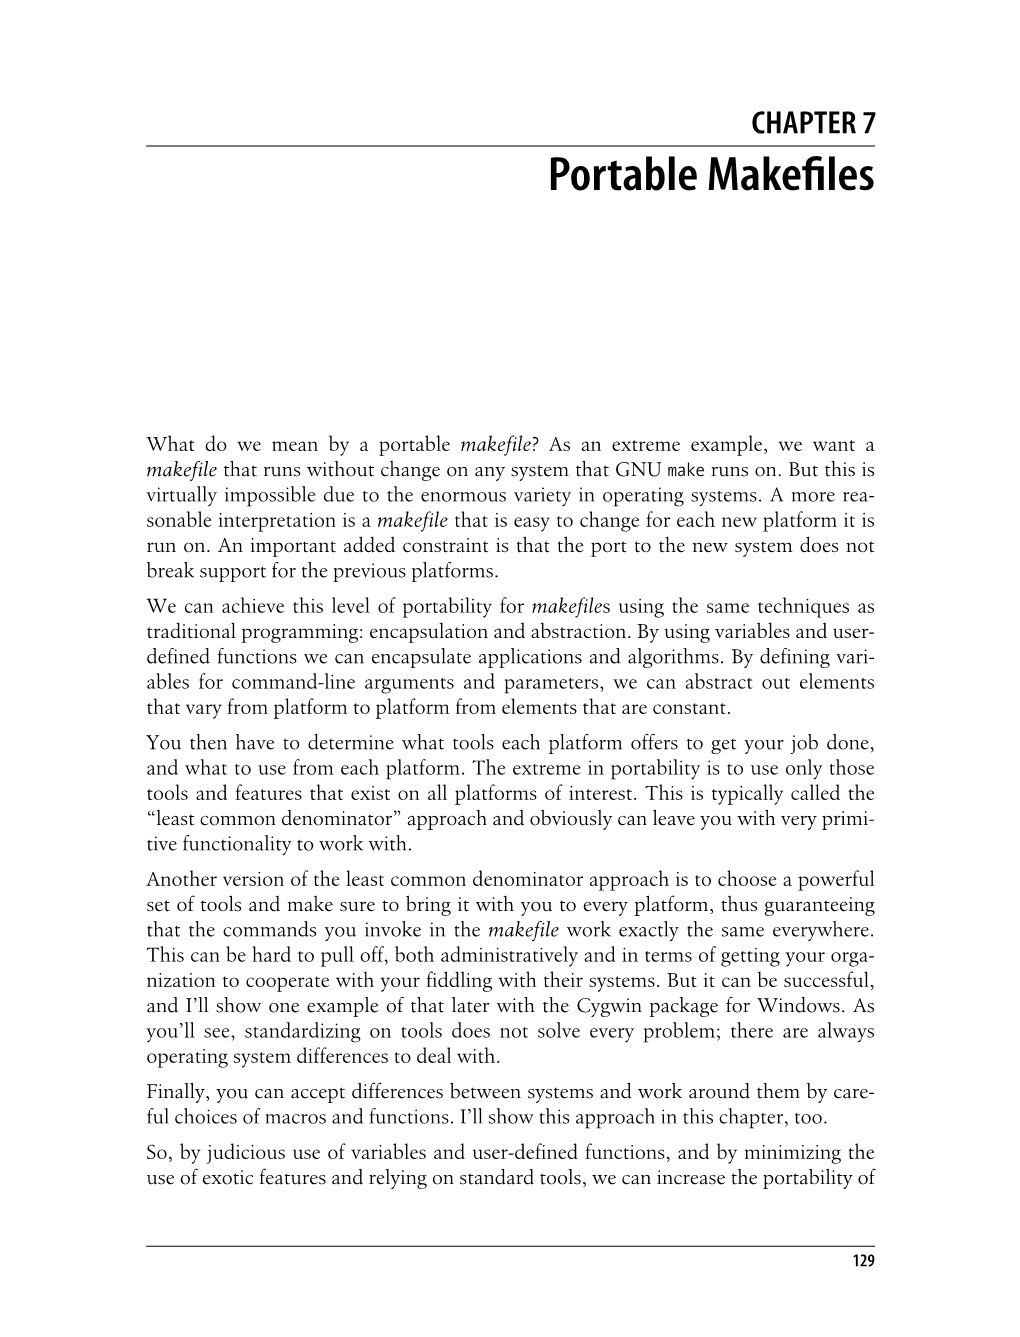 Chapter 7: Portable Makefiles